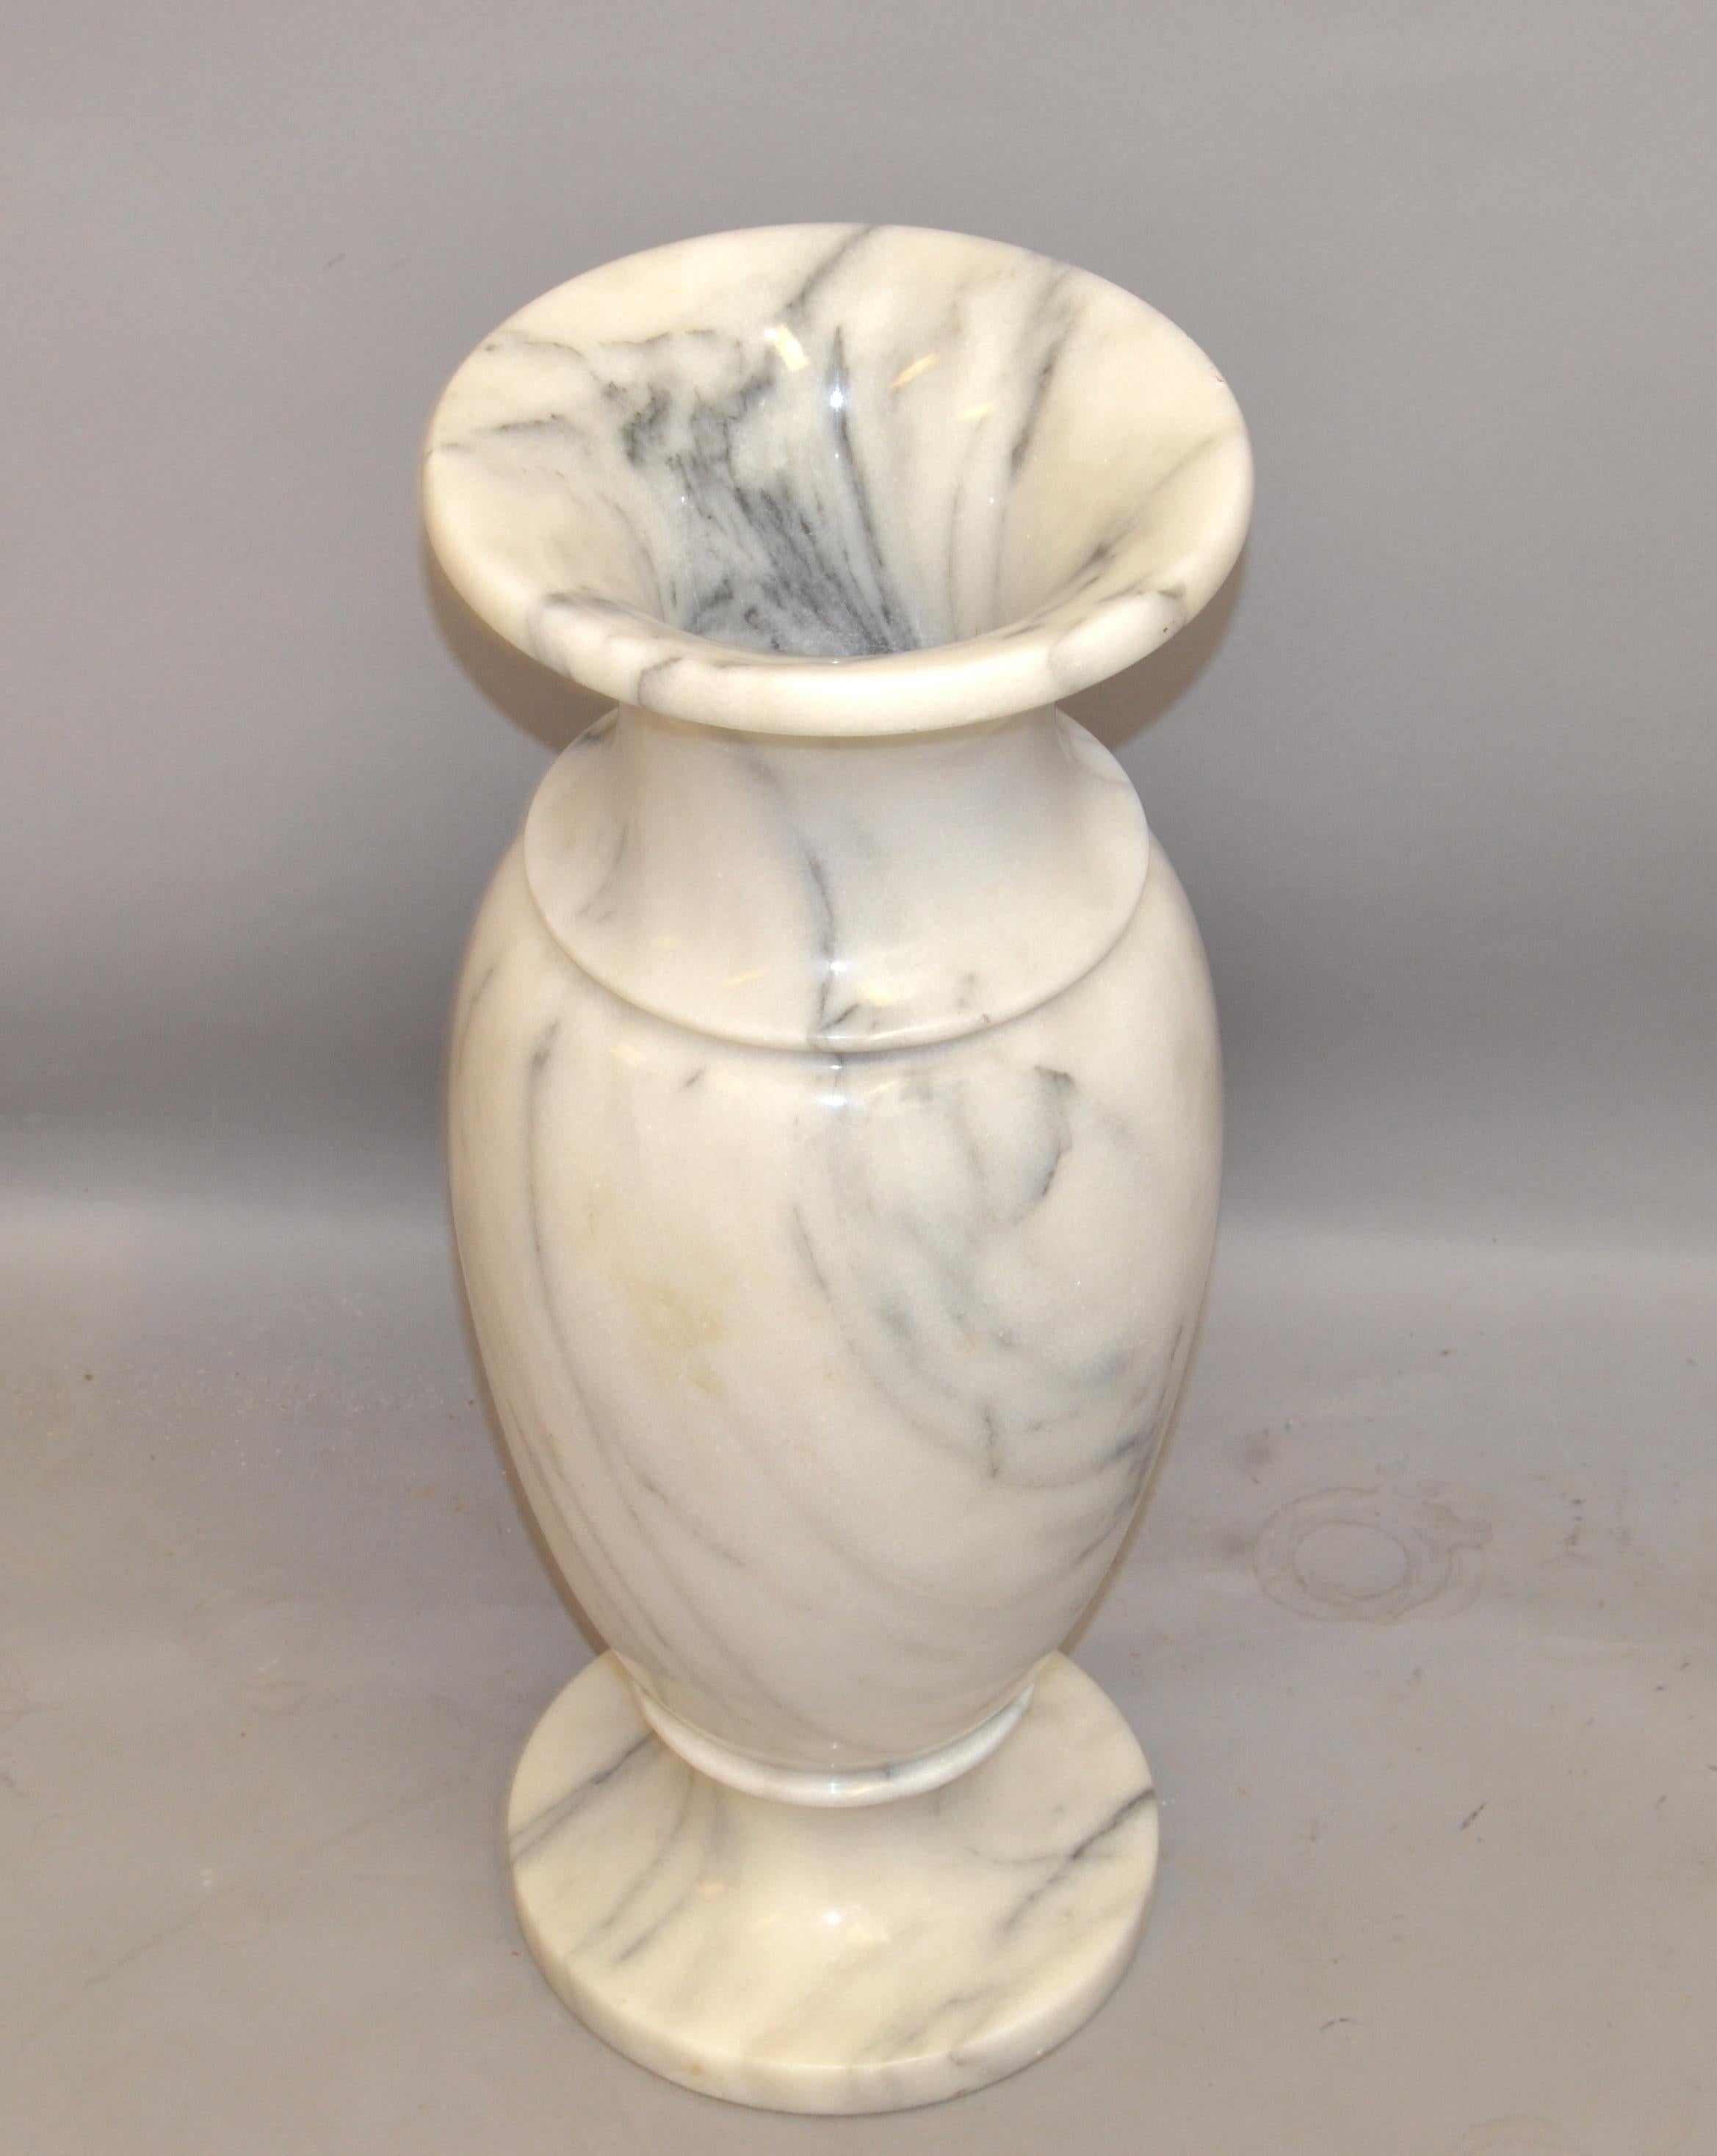 Art Deco Style 20th century hand carved veined white carrara marble vase urn vessel Italy.
This Vase is very heavy and amazingly crafted, very decorative on a Classic Italian Table.
In very good vintage condition with some minor wear due to use at